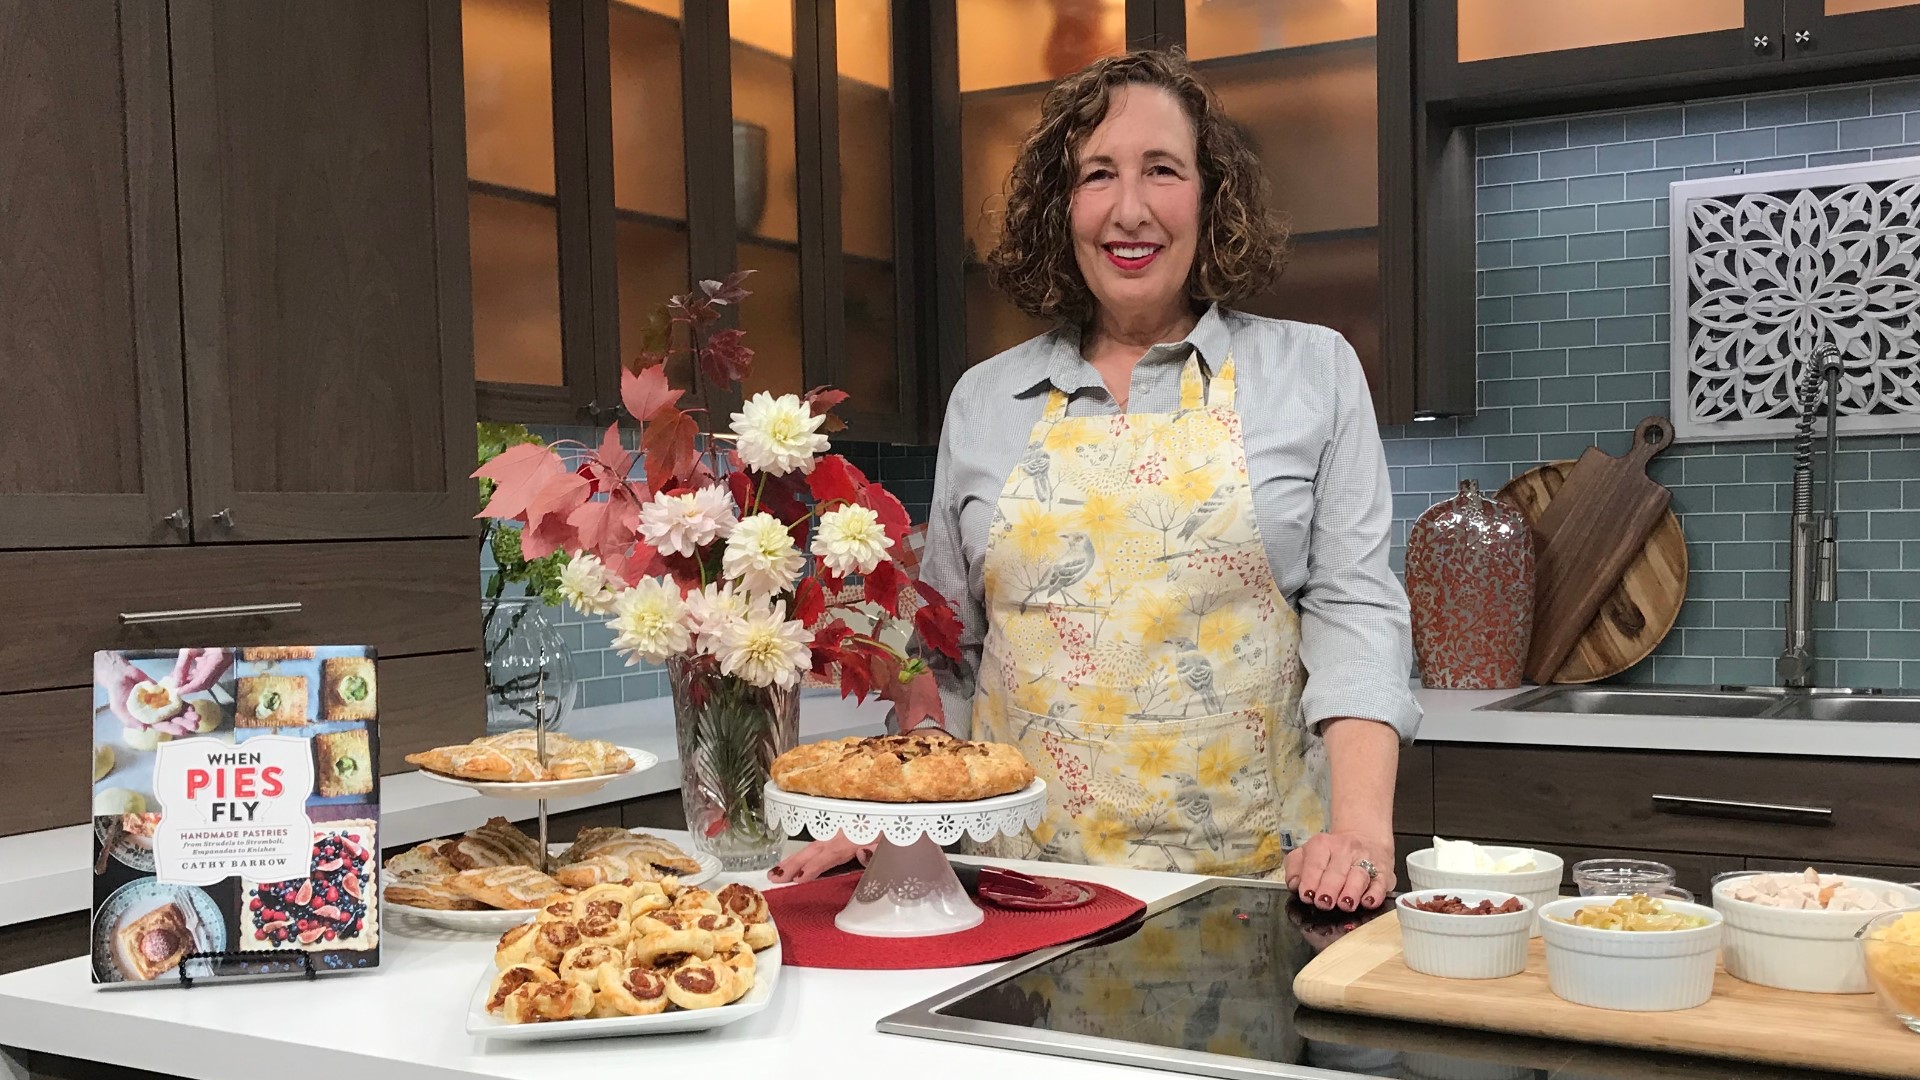 James Beard-nominated food writer, Cathy Barrow, shares her recipe for traditional holiday leftovers from her latest cookbook, "When Pies Fly".